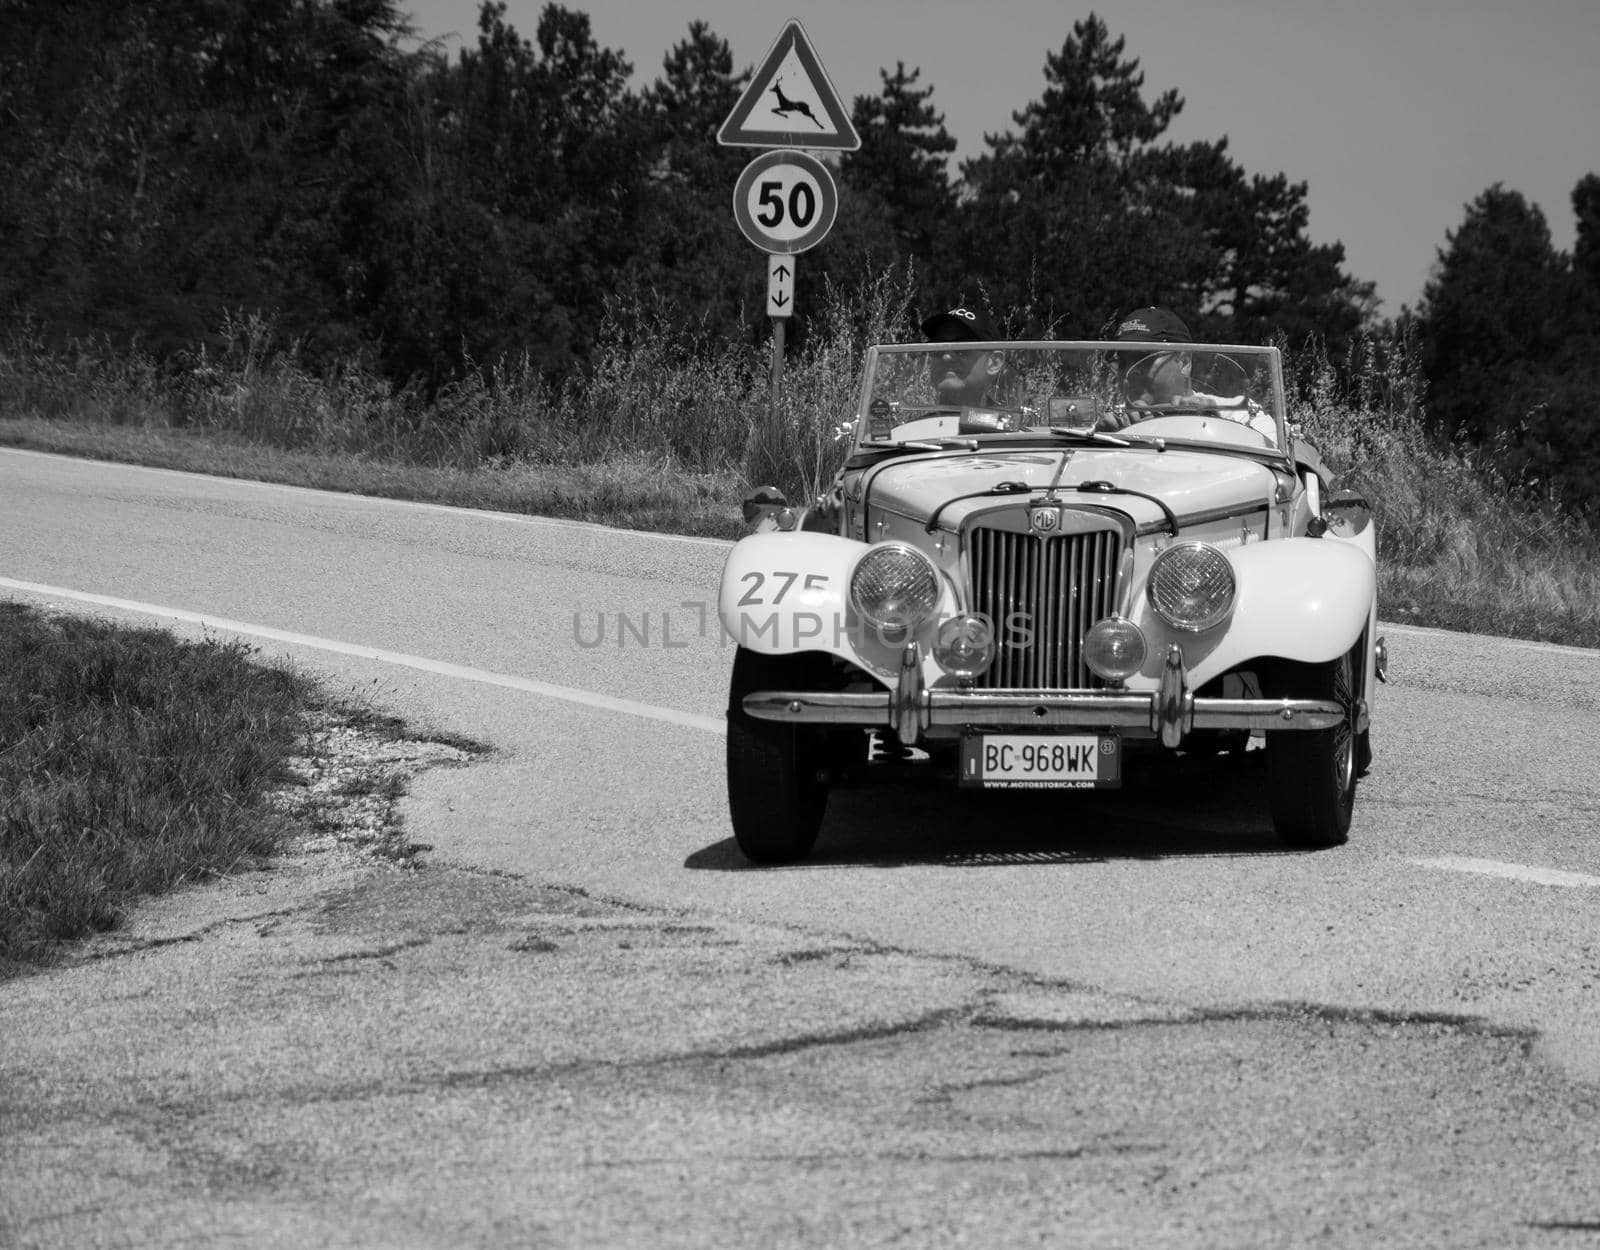 MG TF 1250 1953 on an old racing car in rally Mille Miglia 2022 the famous italian historical race (1927-1957 by massimocampanari